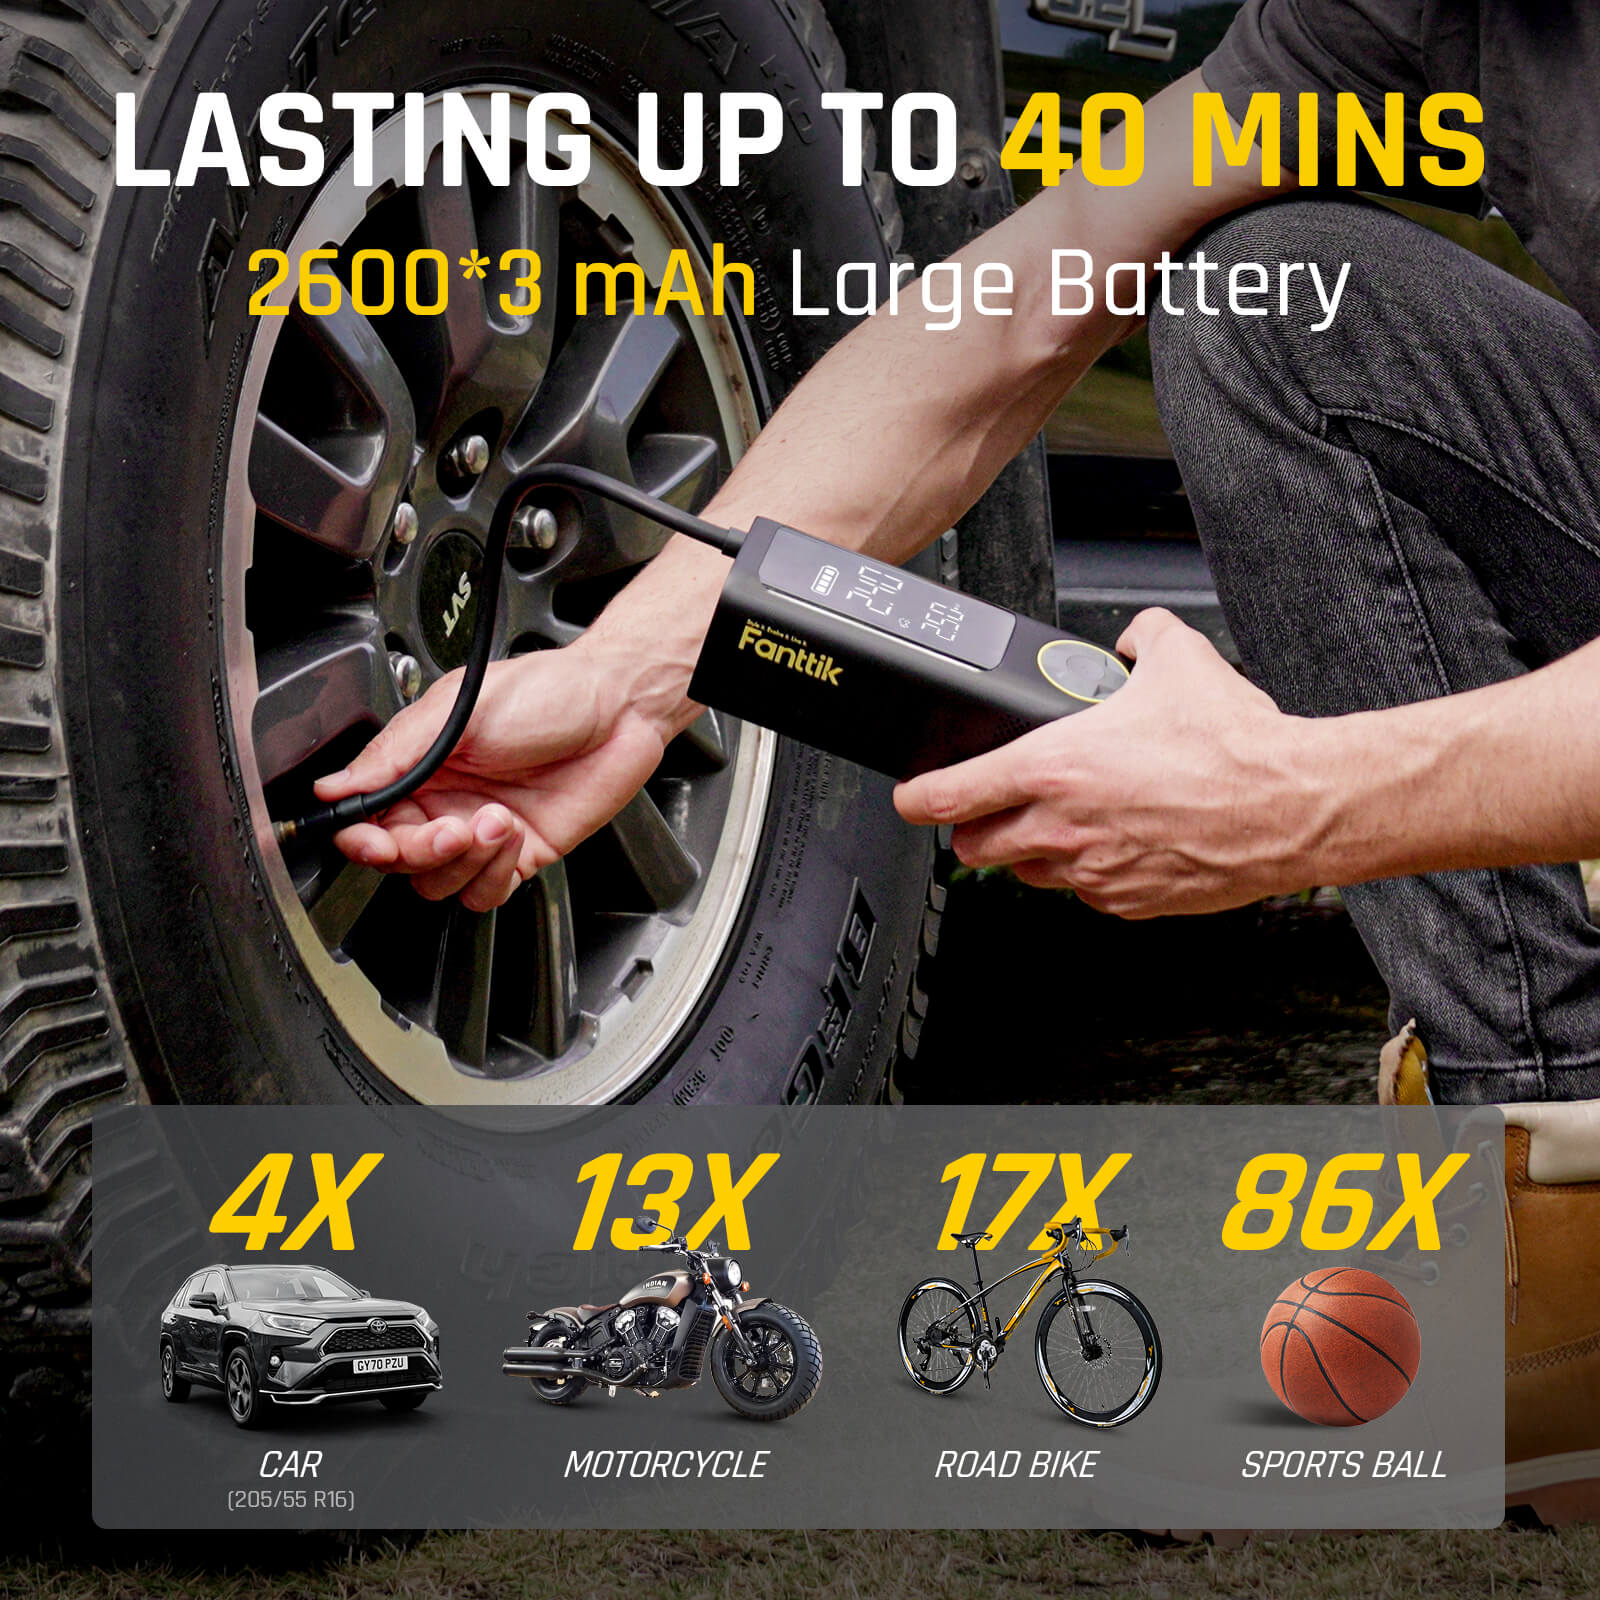 7800mAh battery, X8 APEX is perfect for inflating cars, motorcycles, bikes, balls, and other inflatables, including new-energy vehicles like Tesla